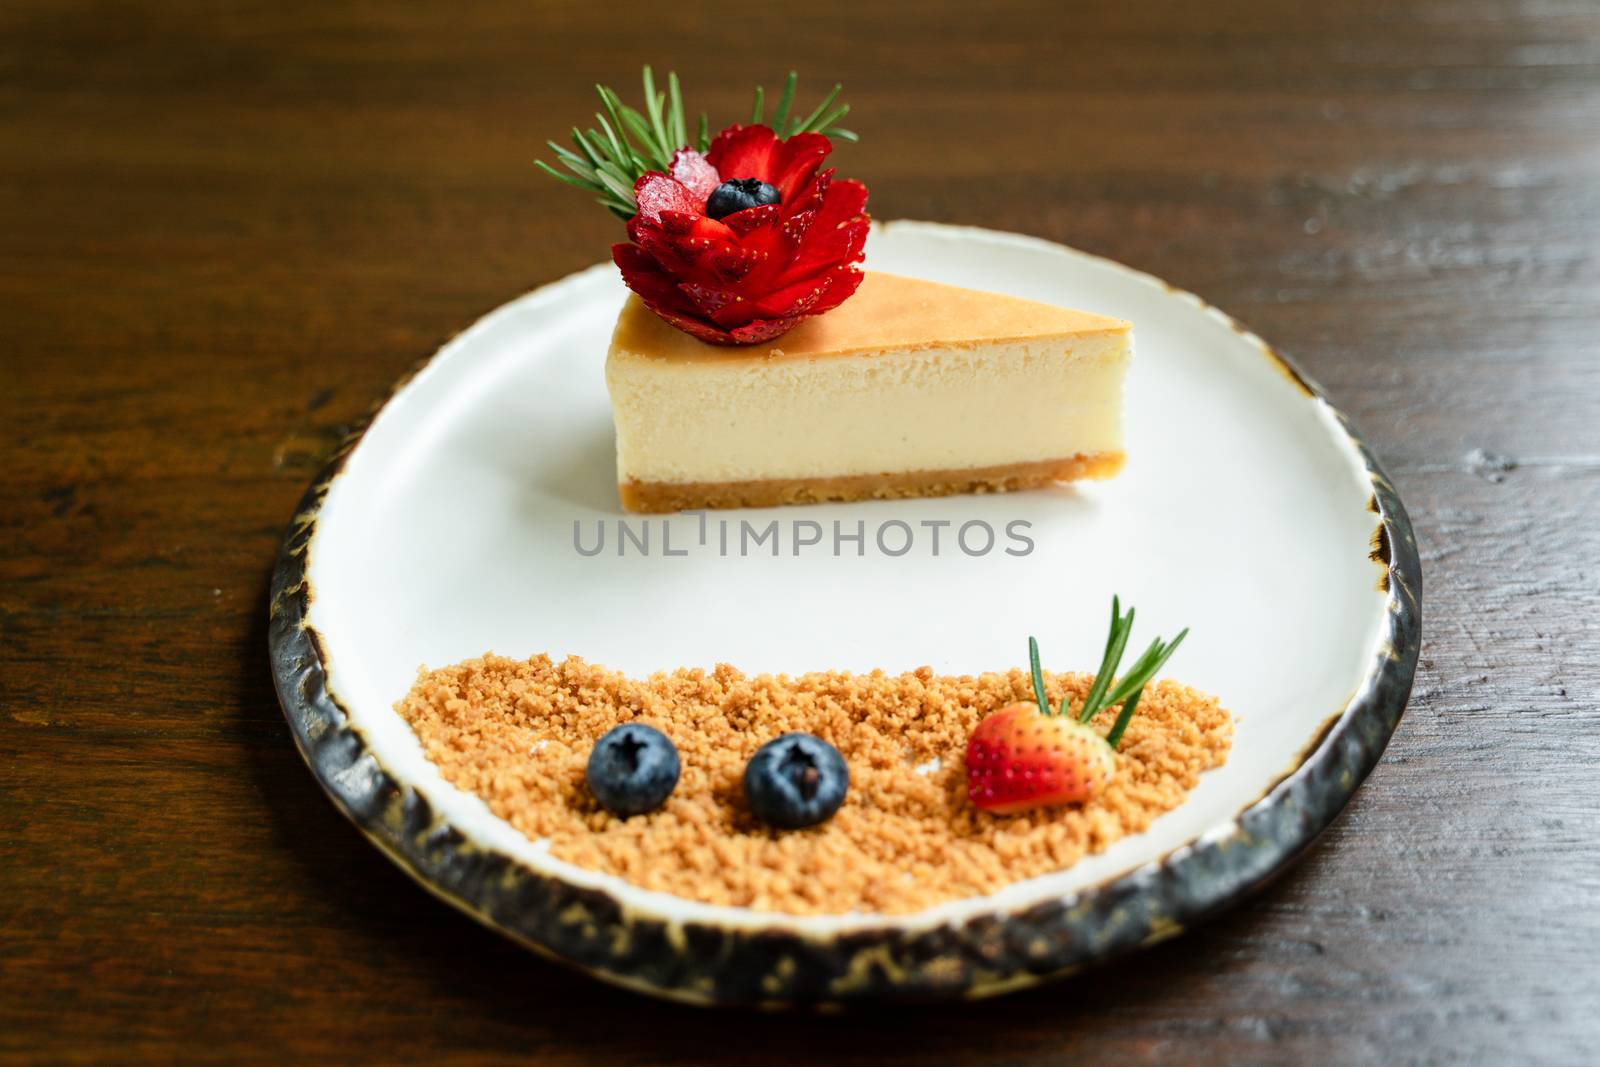 Top view photos of beautifully decorated cakes on white tiled plates and background of old wooden tables